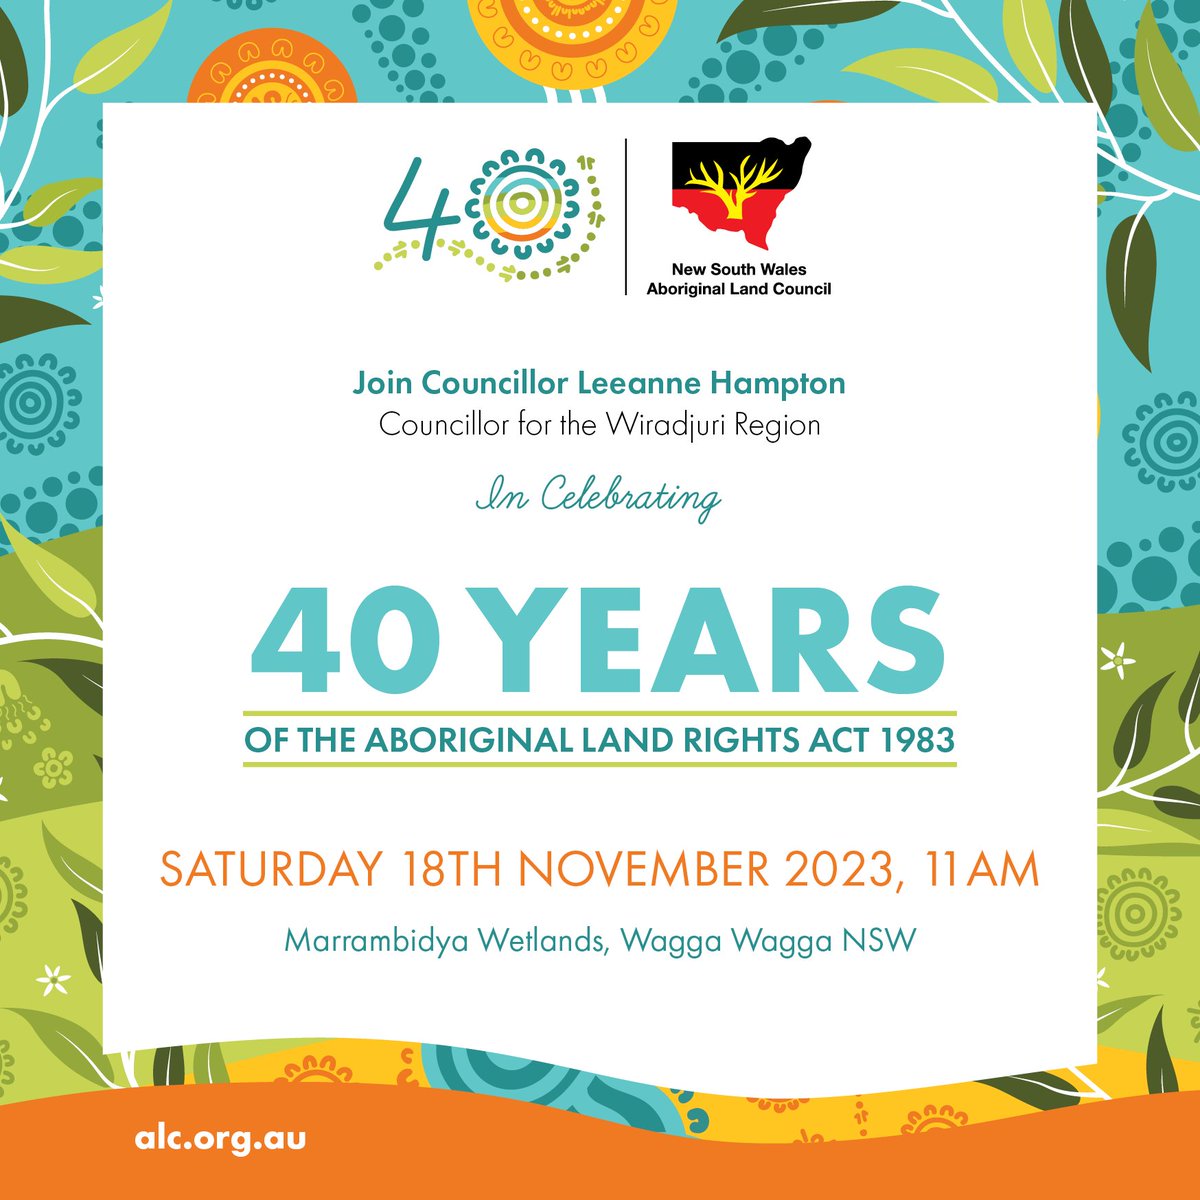 🎉 Join Councillor for the Wiradjuri Region, Leeanne Hampton in an EPIC celebration of 40 YEARS of the Aboriginal Land Rights Act 1983. Save the date for this weekend: Saturday, 18th November at 11AM at Marrambidya Wetlands #AboriginalLandRights #40YearsStrong #Wiradjuri